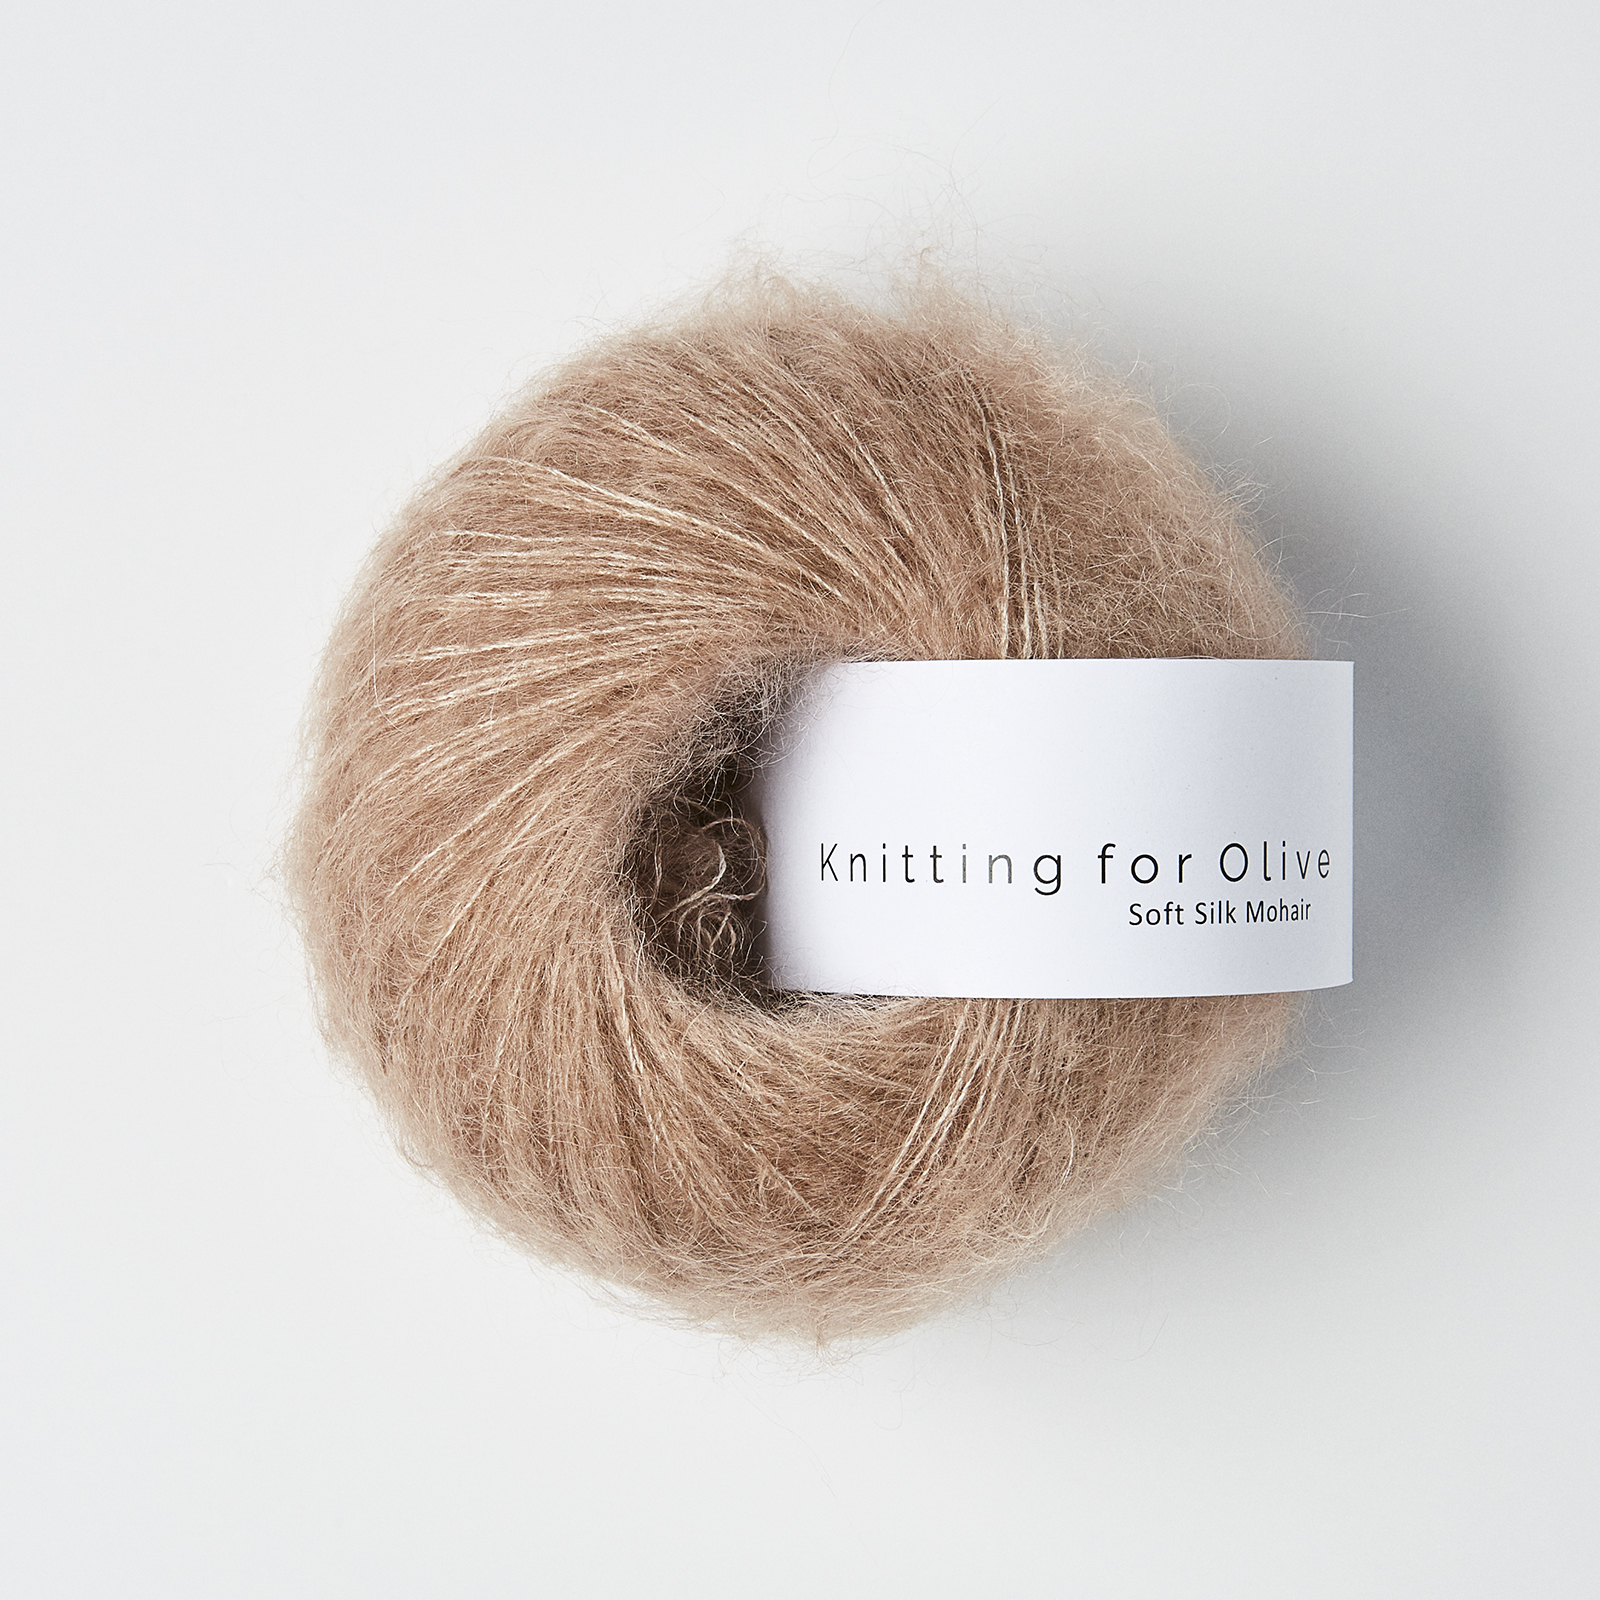 soft silk mohair knitting for olive | soft silk mohair: rose clay